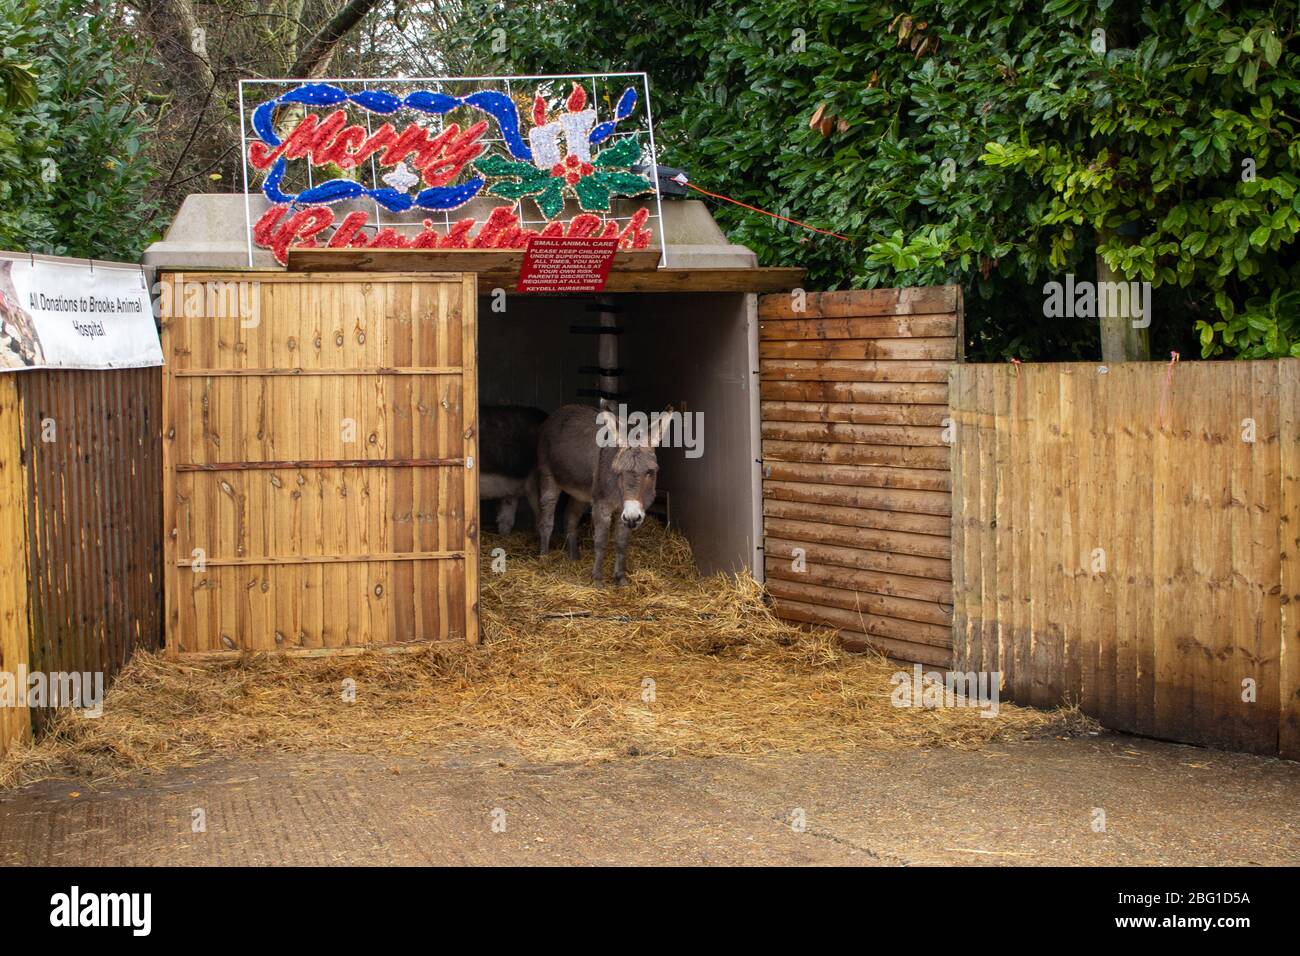 A donkey inside a stable or barn at a show at a Christmas show Stock Photo